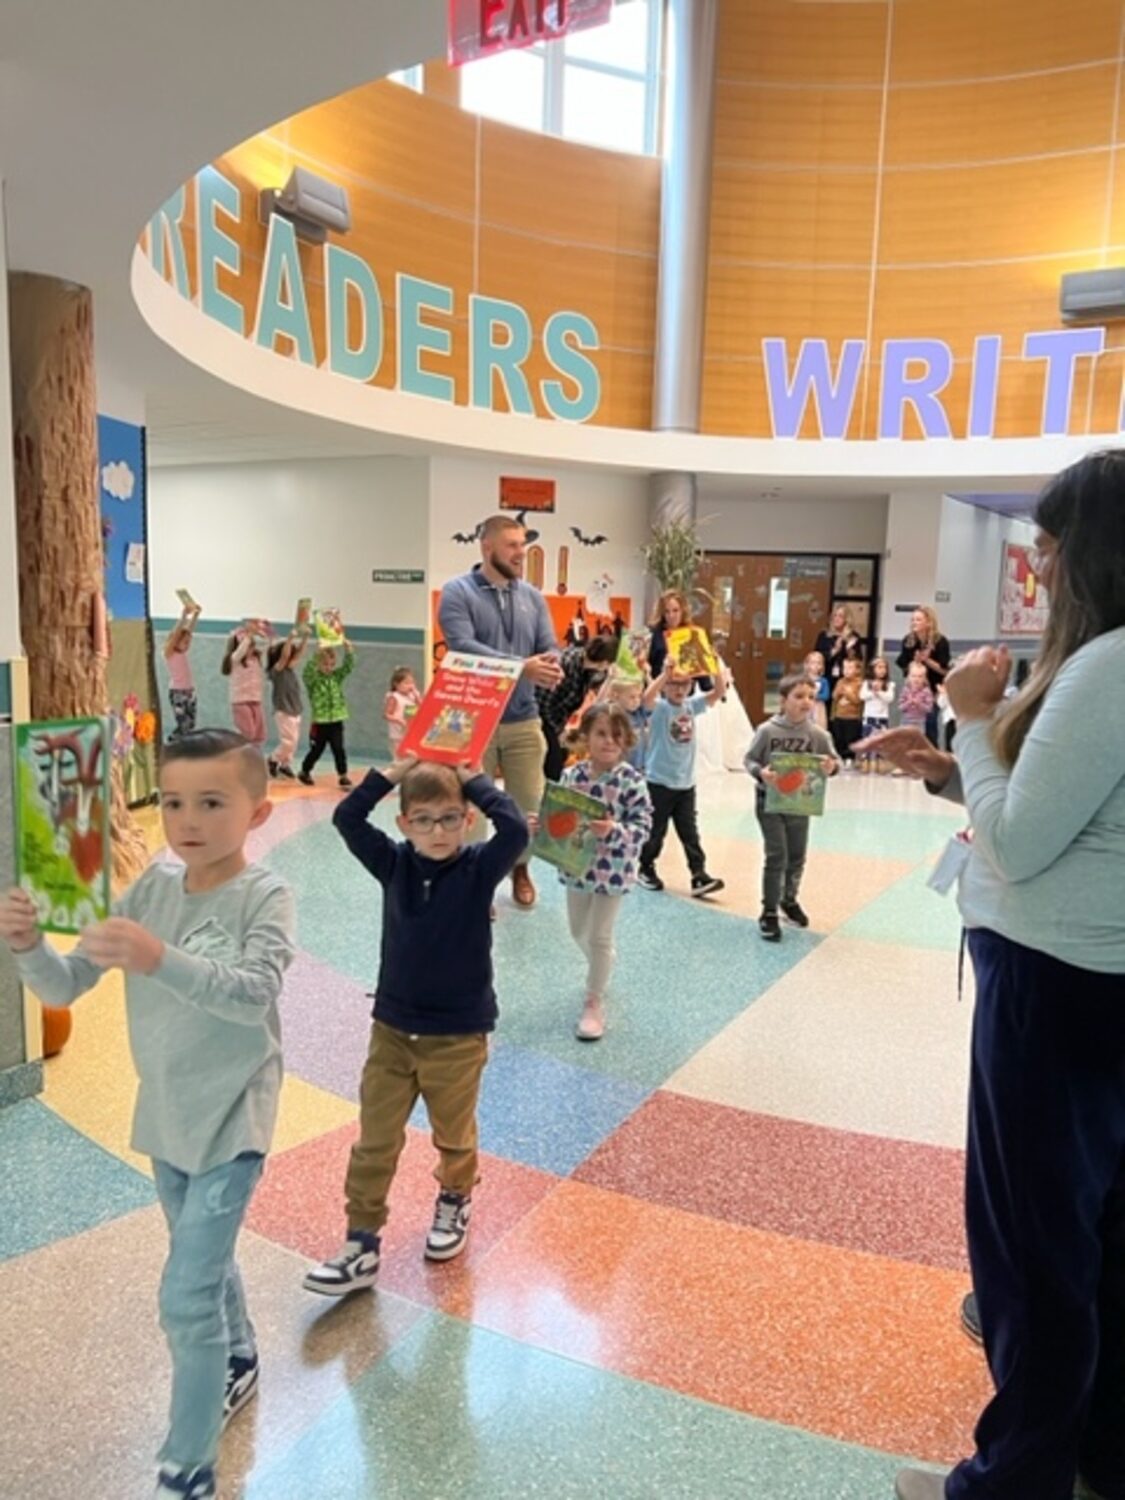 Tuttle Avenue Elementary School kindergarten students held their favorite books over their heads as they paraded through the school rotunda celebrating the end of the semester’s reading and writing units. COURTESY EASTPORT-SOUTH MANOR SCHOOL DISTRICT